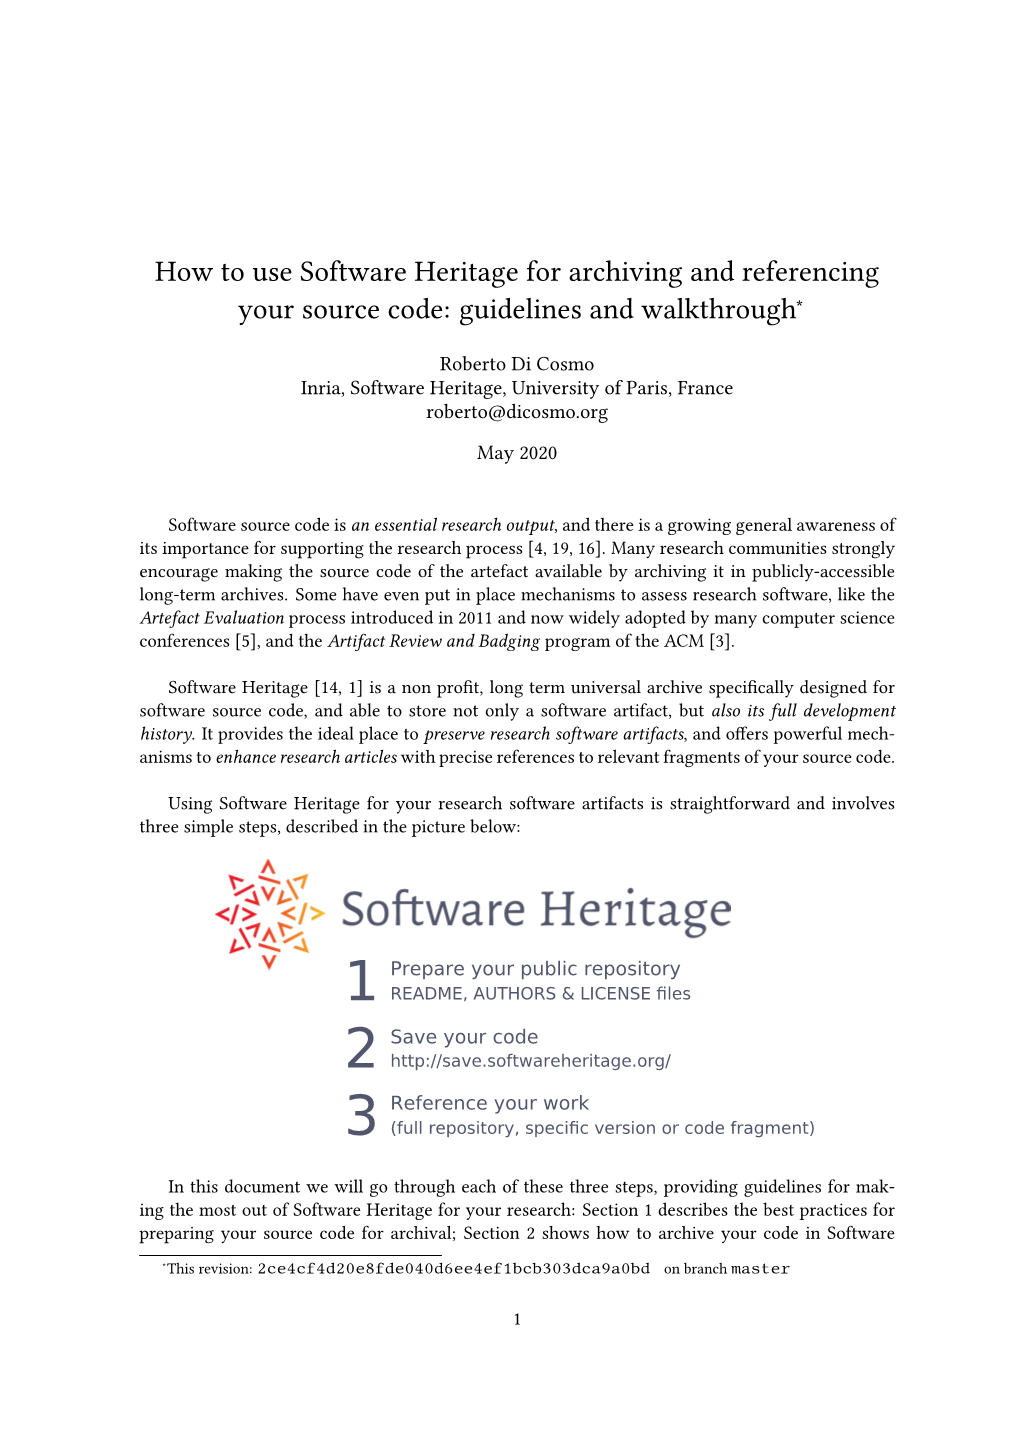 How to Use Software Heritage for Archiving and Referencing Your Source Code: Guidelines and Walkthrough∗